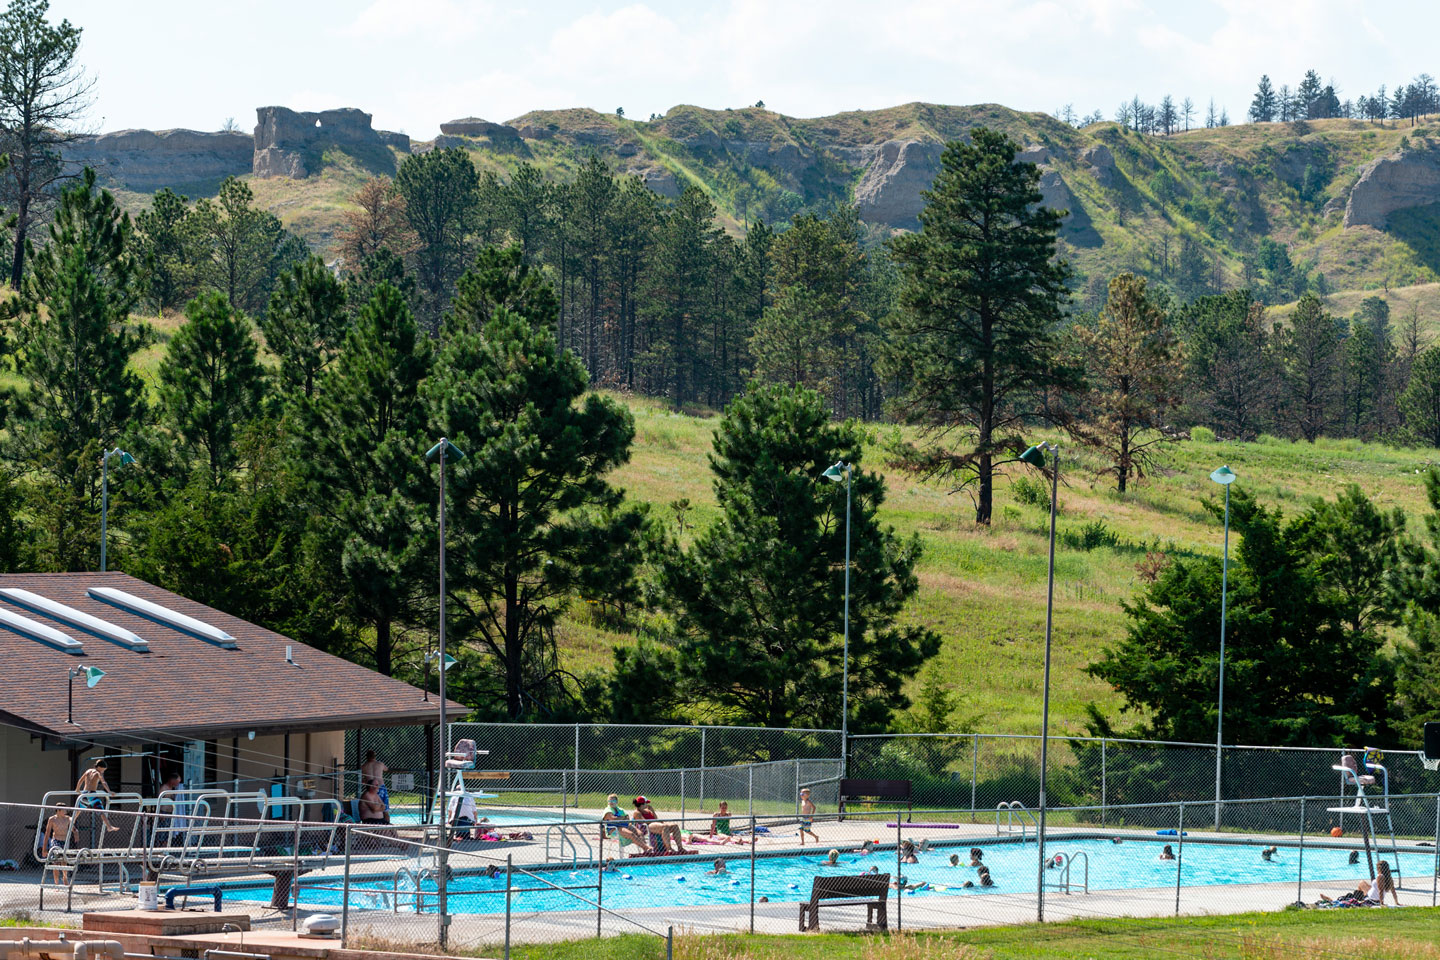 Read More: Six great places to swim at Nebraska’s state parks